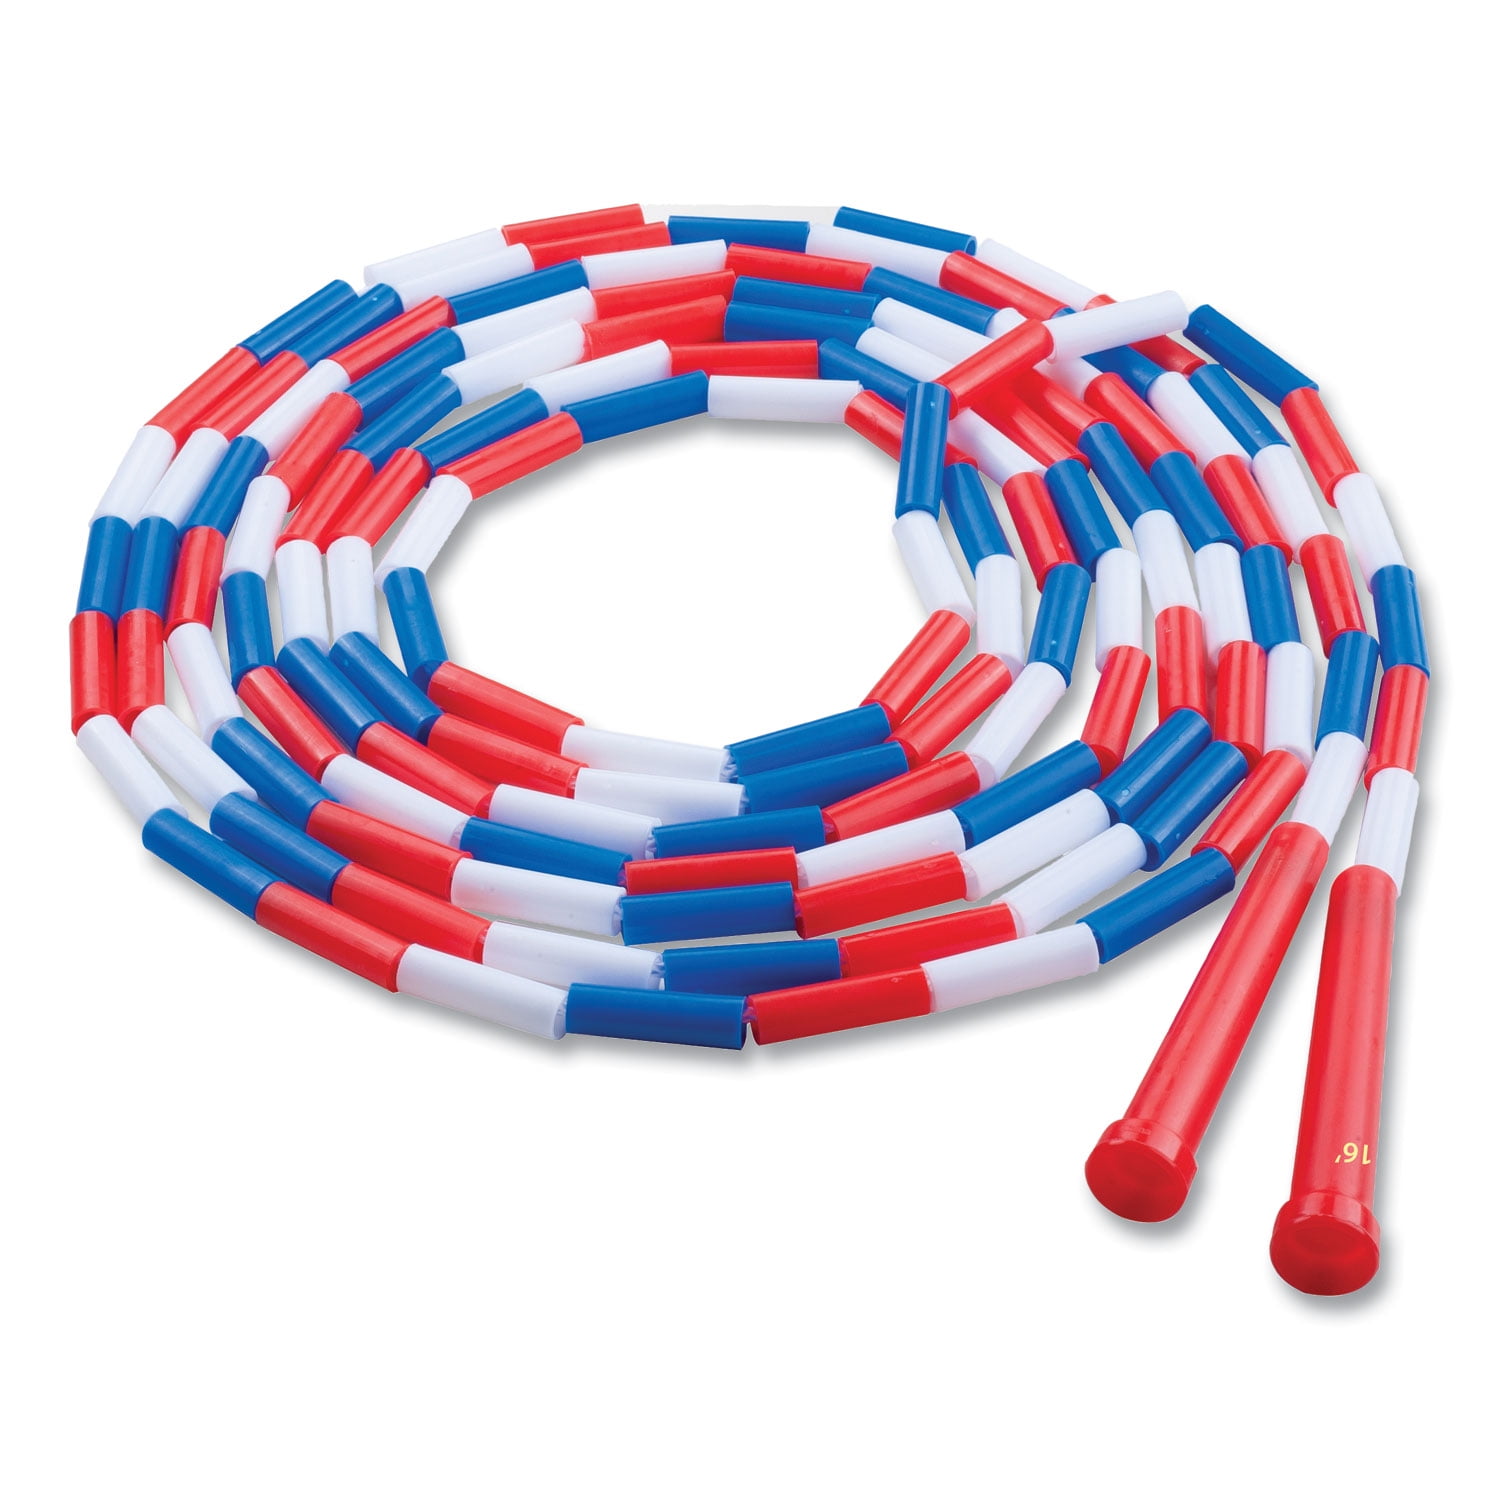 Two 16 Ft Double Dutch Jump Rope W/ Plastic Segments Red White Blue Heavy Duty 